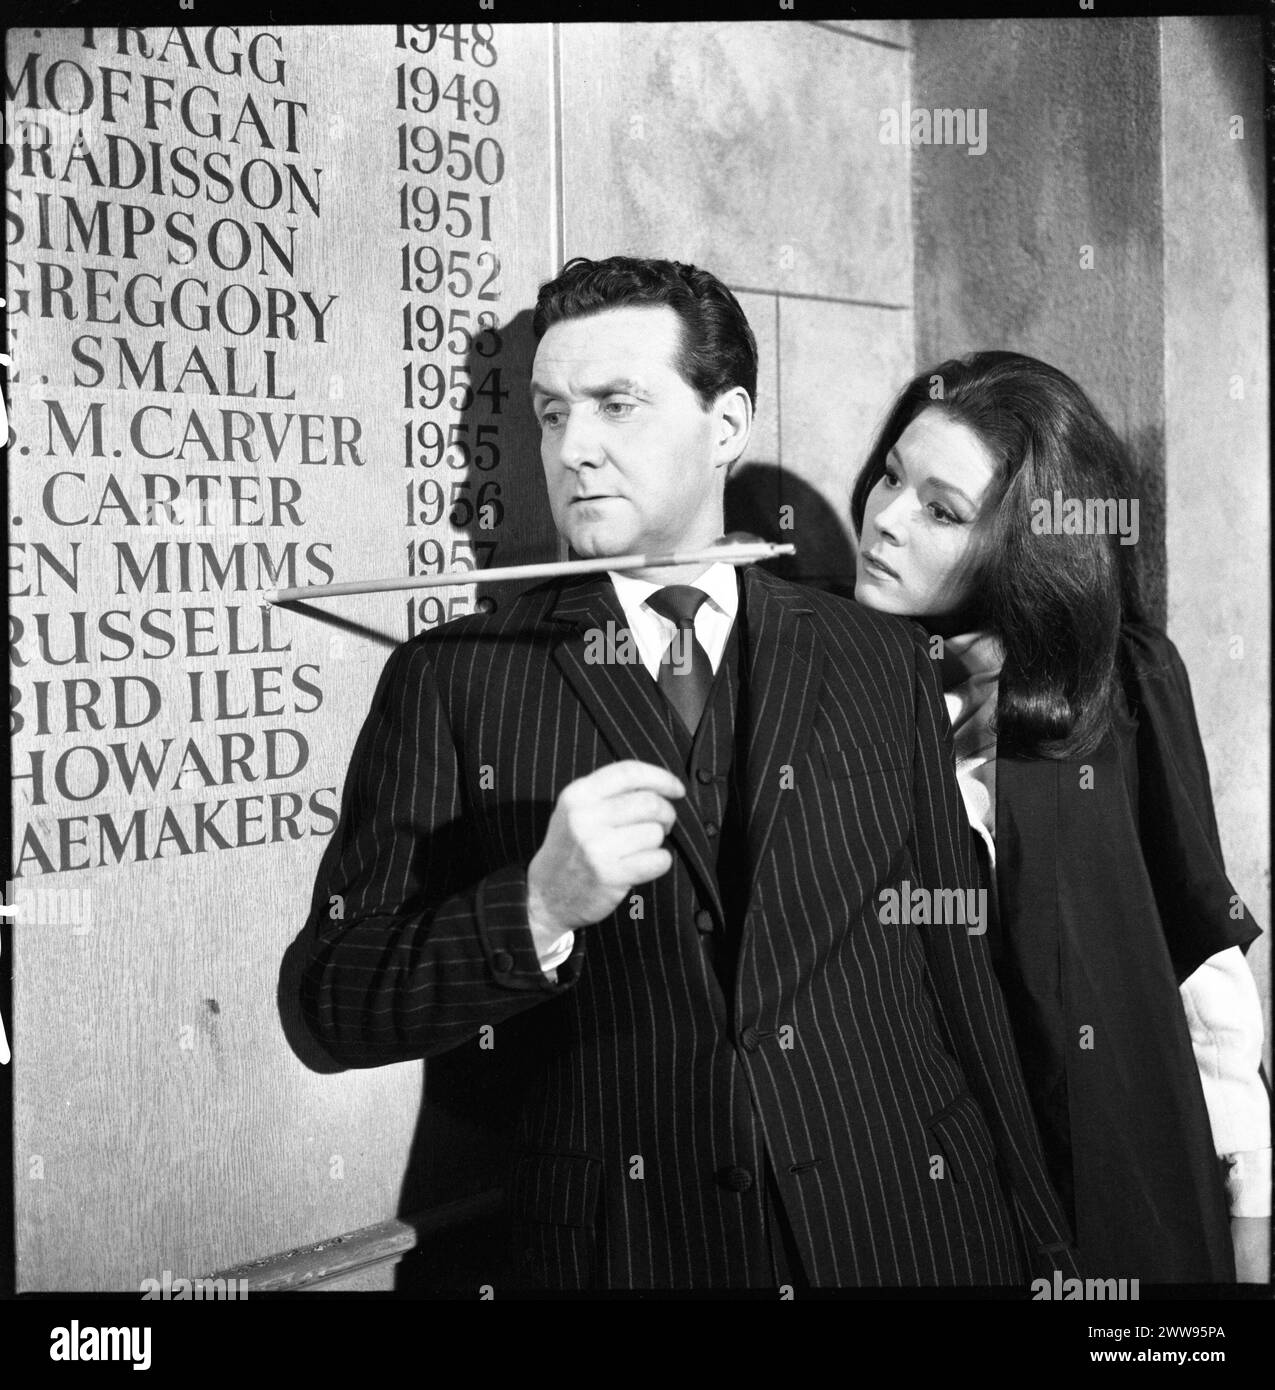 PATRICK MACNEE as John Steed and DIANA RIGG as Emma Peel narrowly miss an arrow  in a scene from the A SENSE OF HISTORY episode 24 of the fourth series of THE AVENGERS TV Series first broadcast on March 8 1966 Director PETER GRAHAM SCOTT Written by MARTIN WOODHOUSE Wardrobe JOHN BATES and JACKIE JACKSON Music LAURIE JOHNSON Associated British Productions for ABC Television Stock Photo